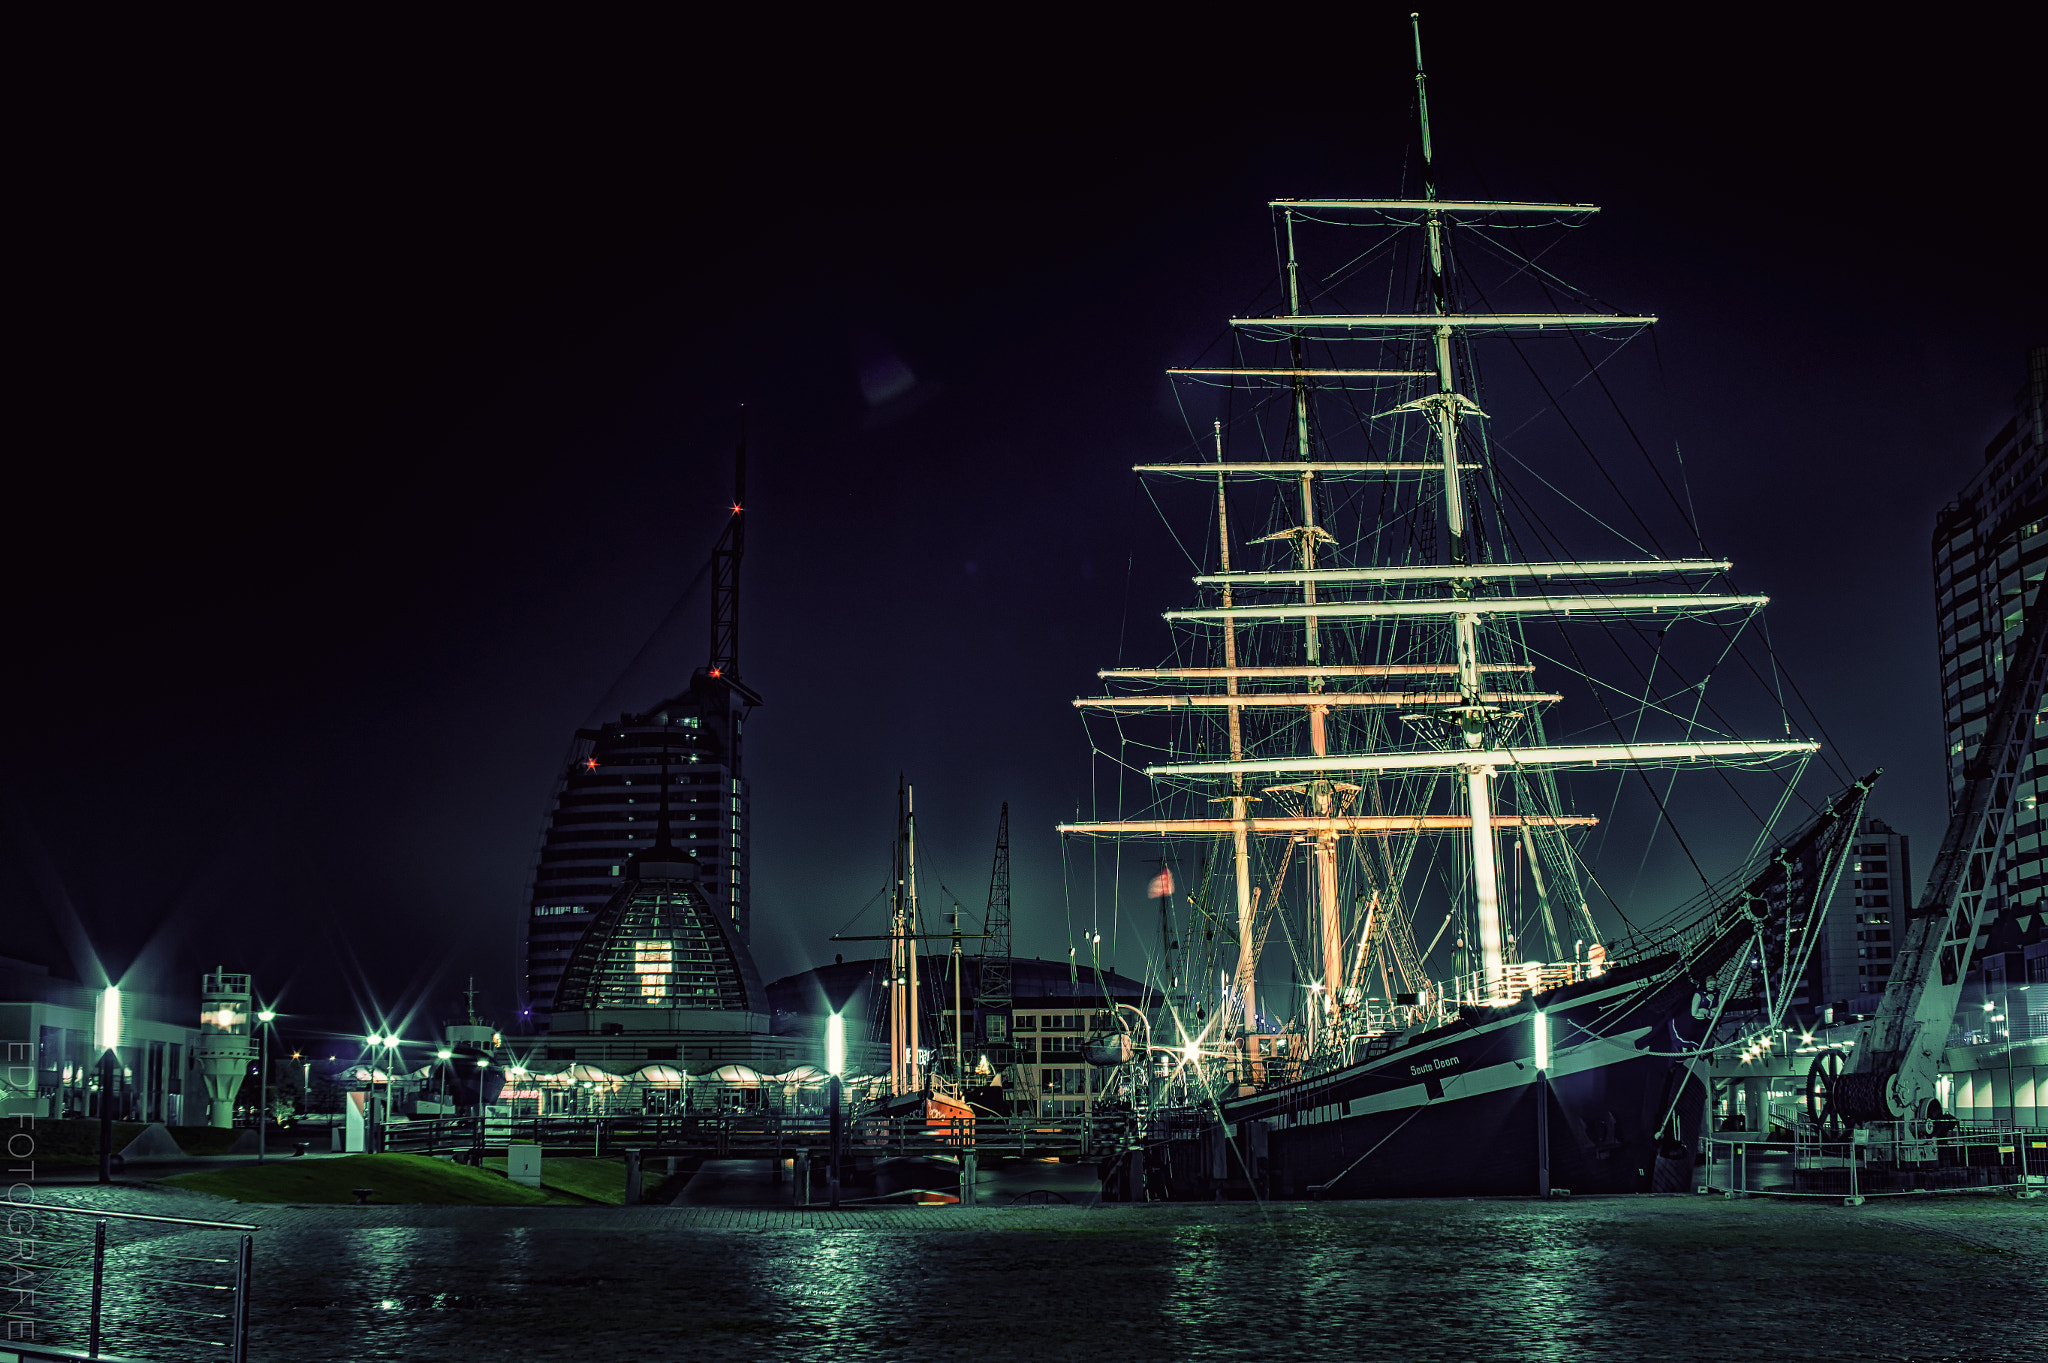 Sony SLT-A58 sample photo. Night at bremerhaven photography